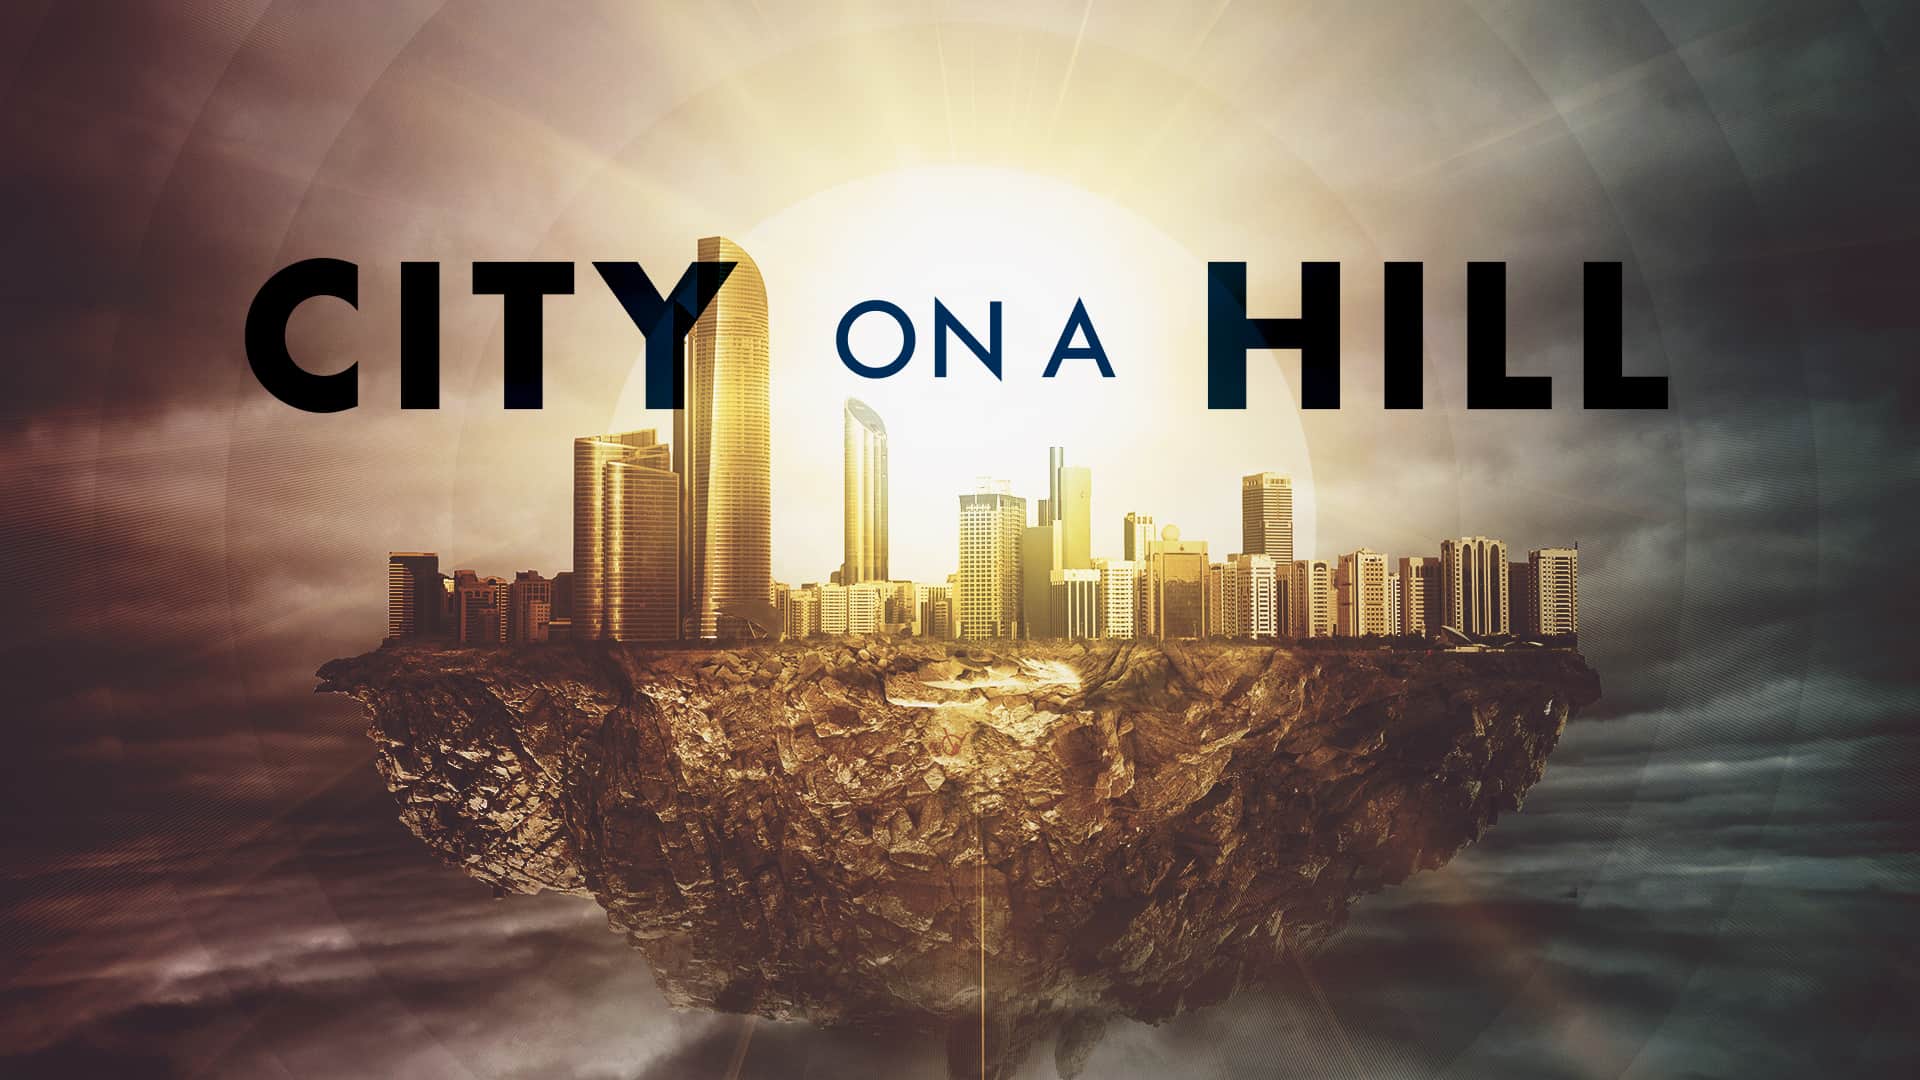 city_on_a_hill-title-1-Wide 16x9